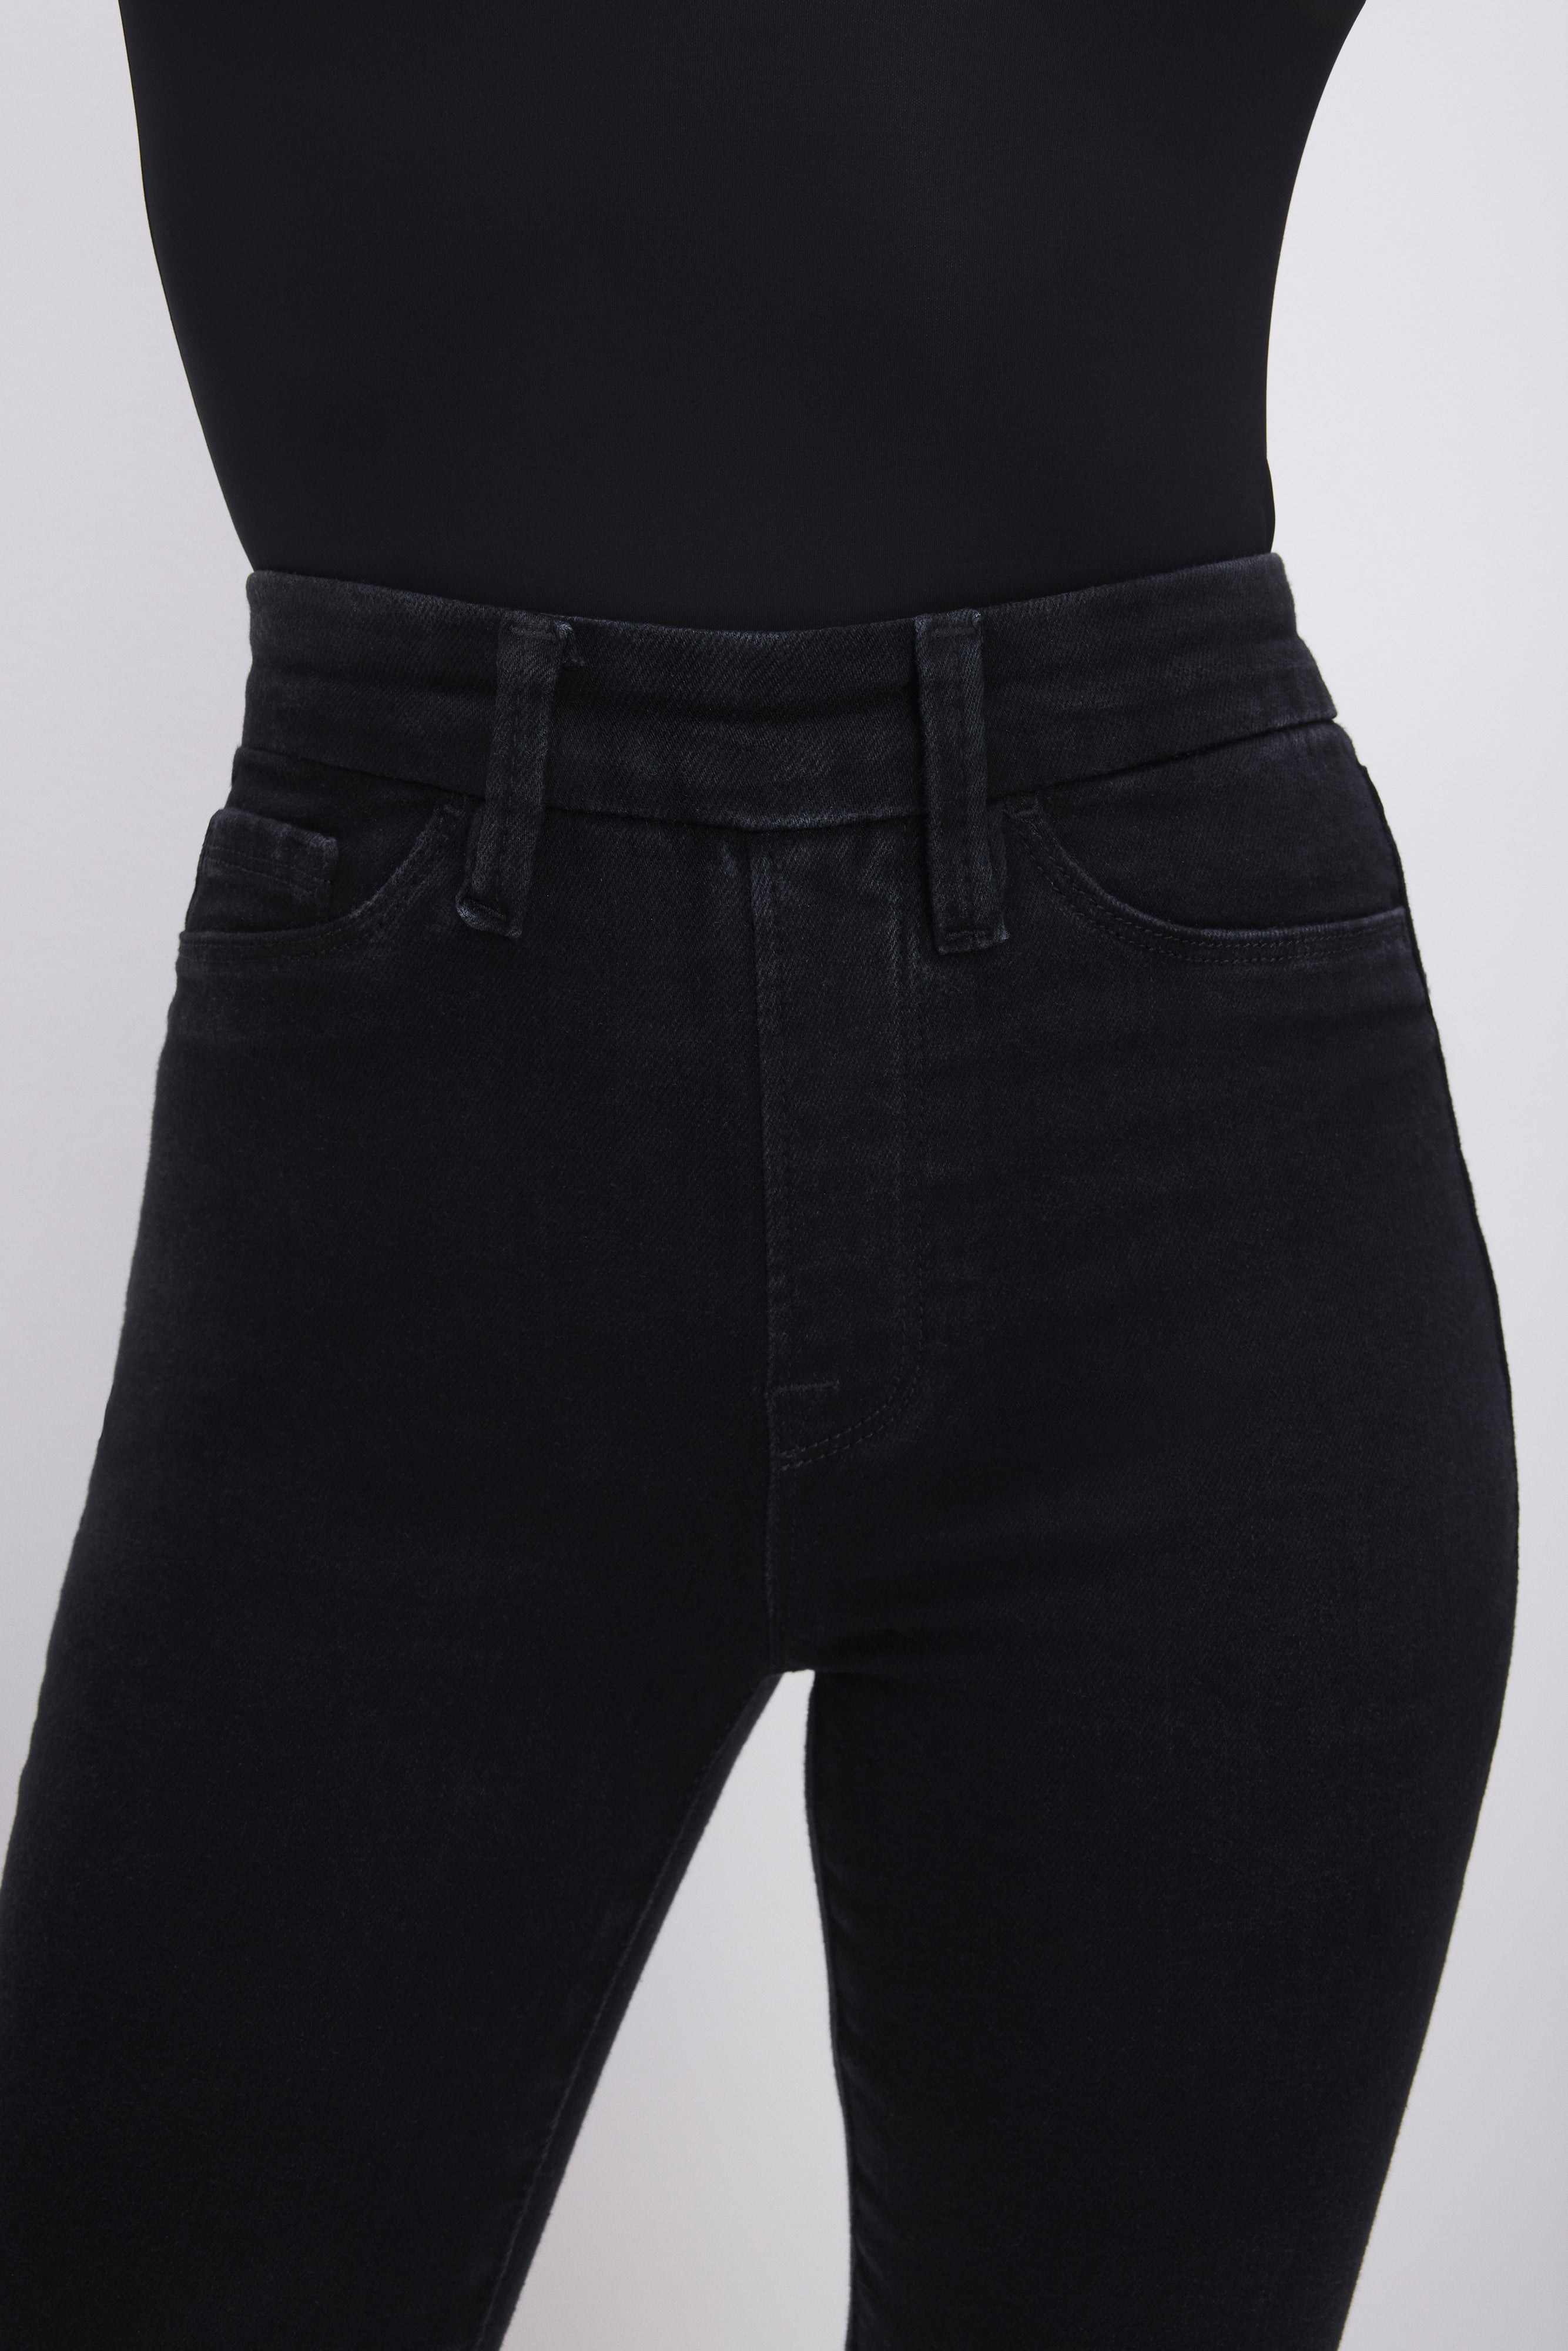 POWER STRETCH PULL-ON SKINNY JEANS | BLACK001 - GOOD AMERICAN